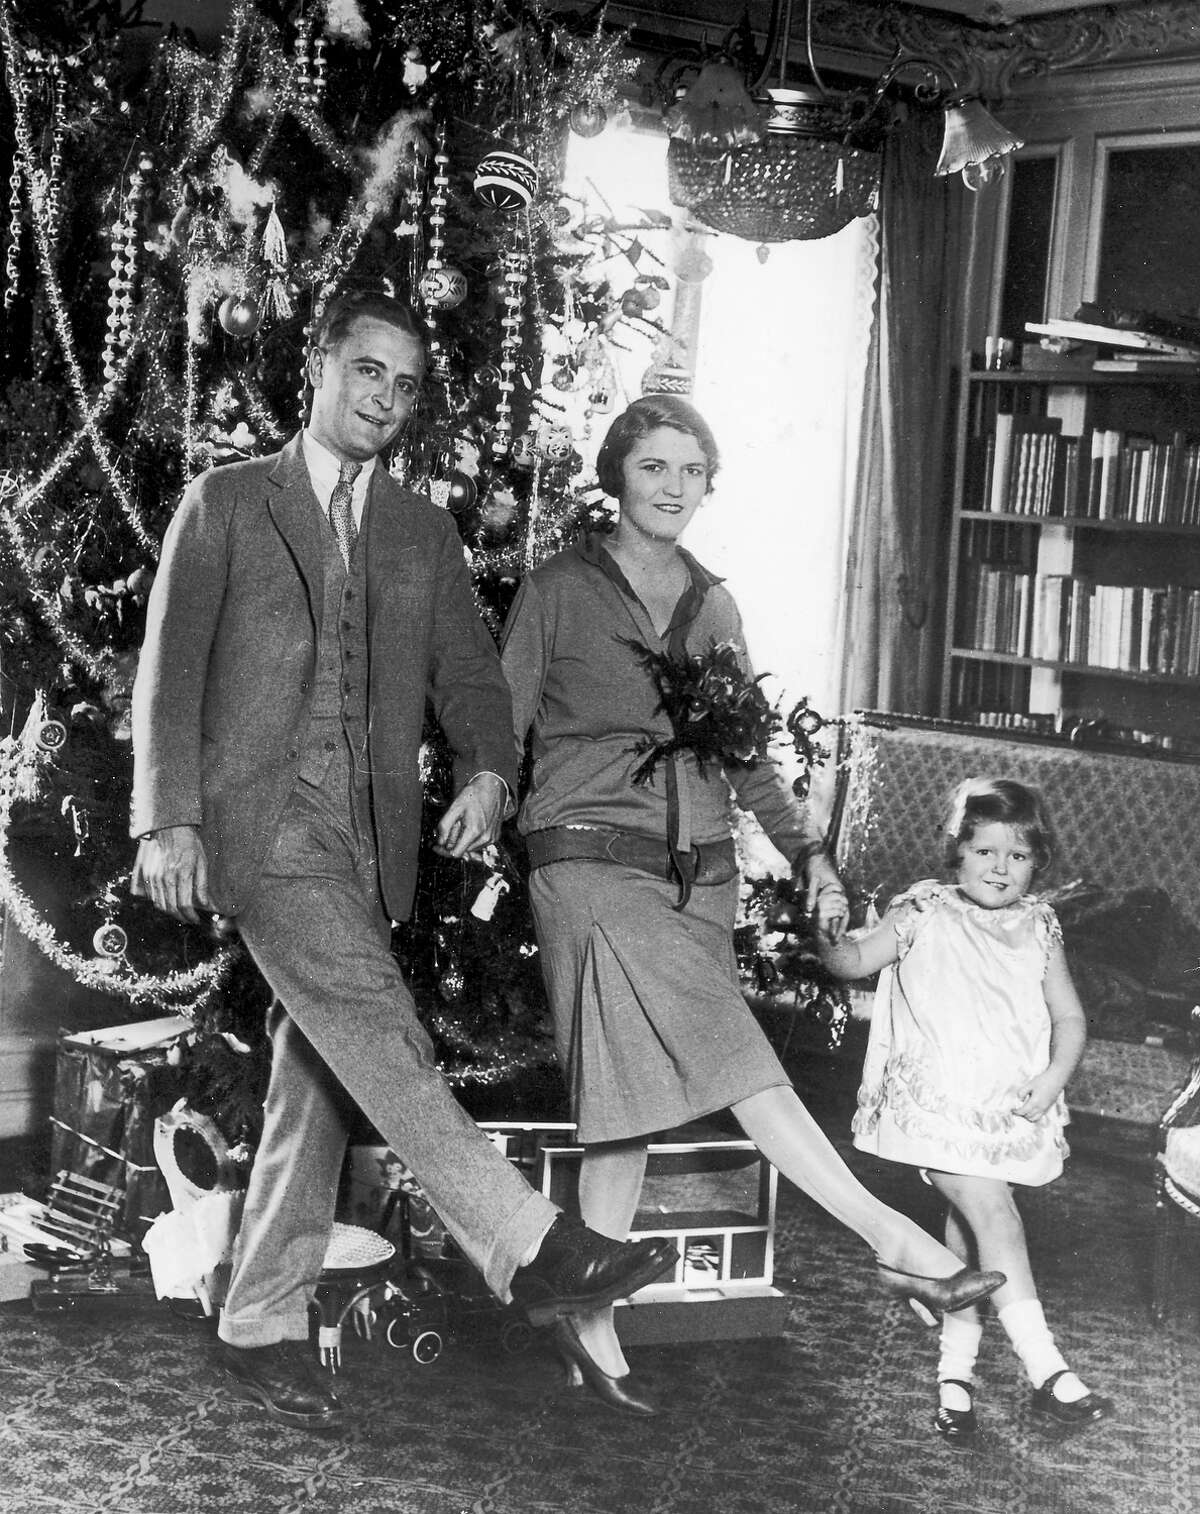 American author F Scott Fitzgerald dances with his wife Zelda Fitzgerald and daughter Frances in front of the Christmas tree in Paris.